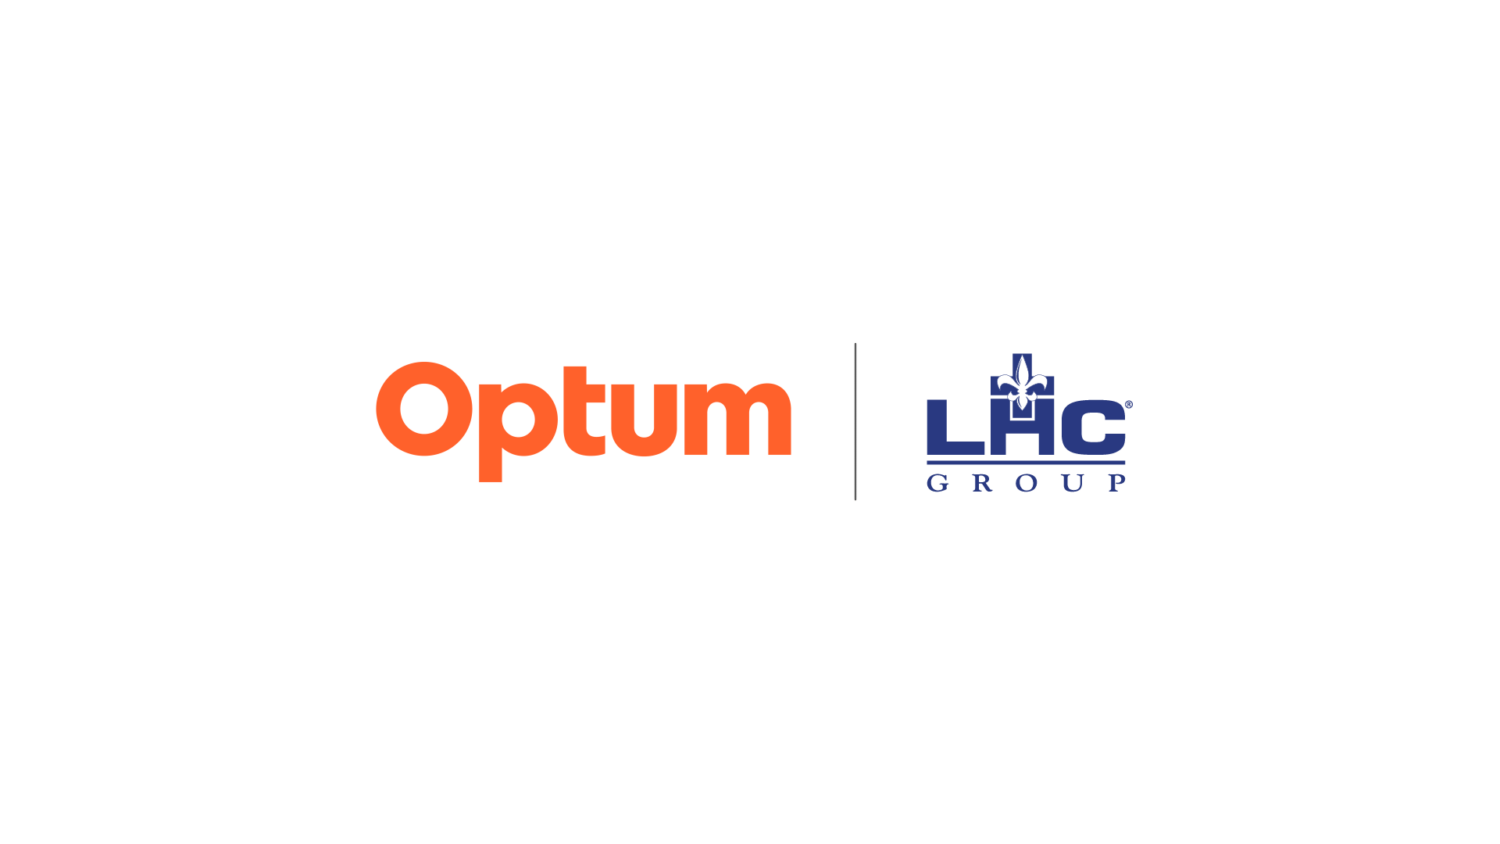 UHG's Optum Acquires Home Health Business LHC Group for $5.4B